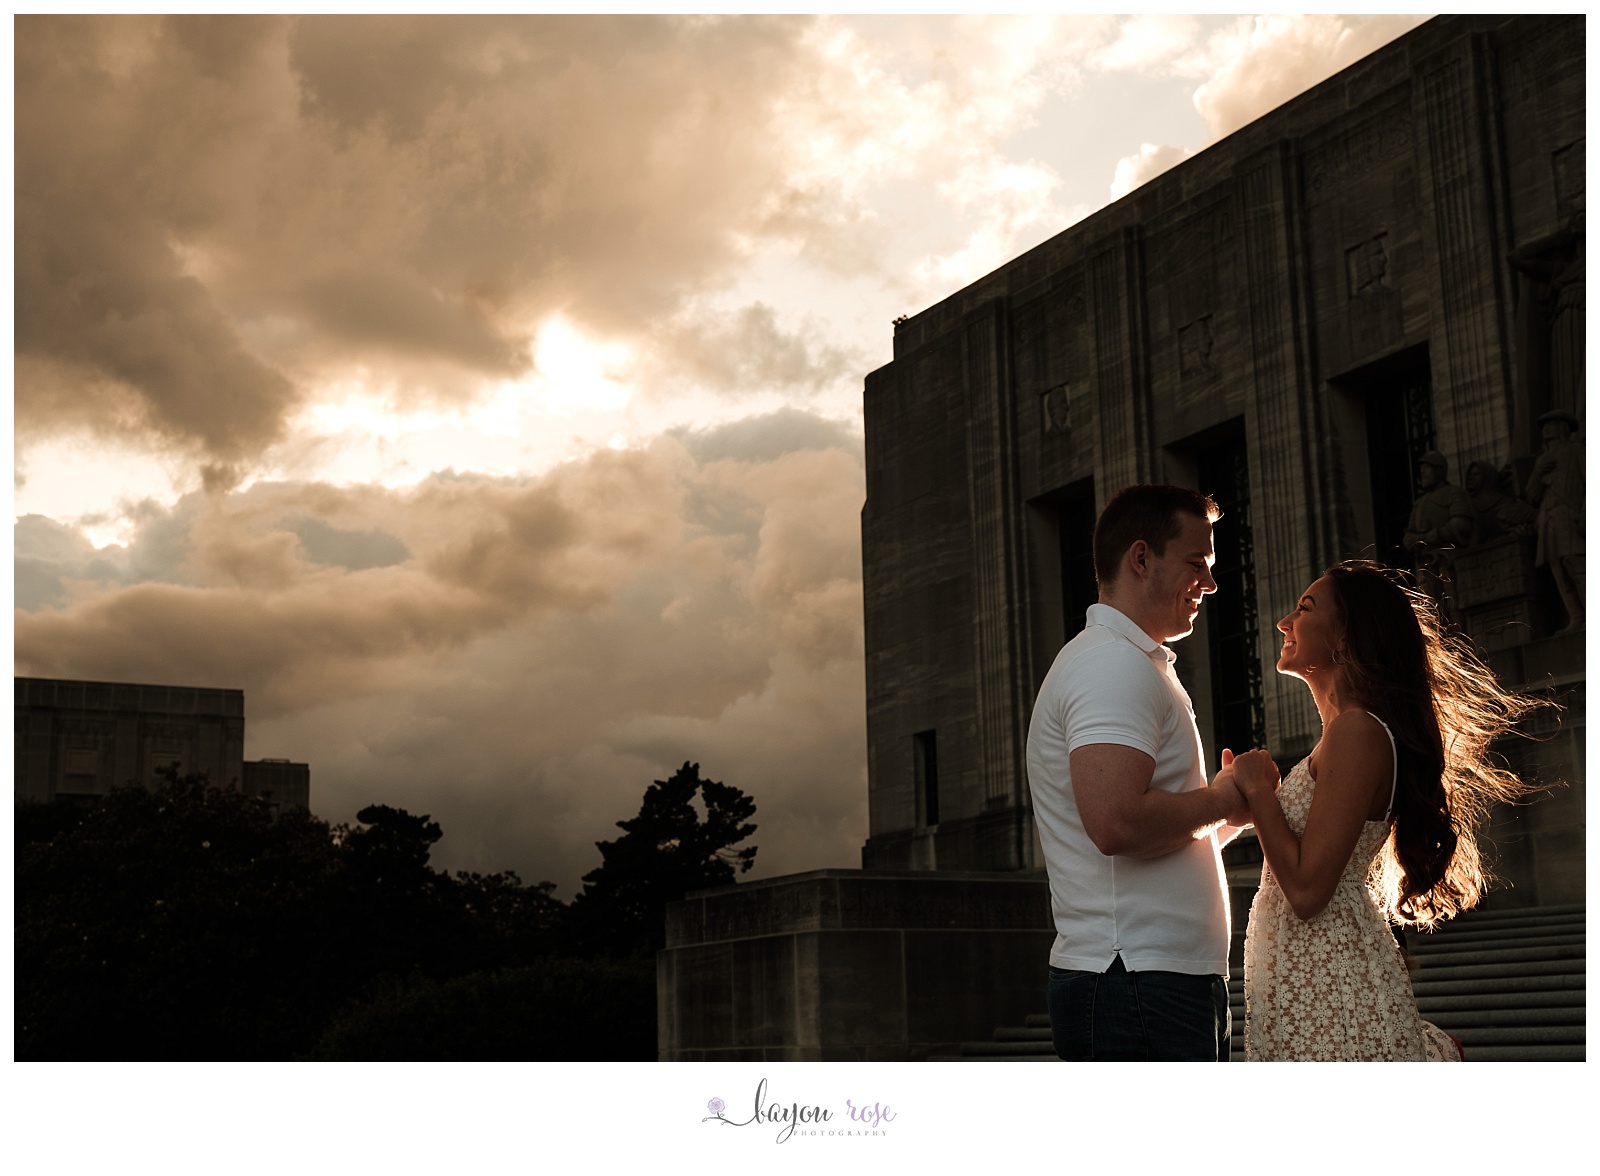 engaged couple silhouetted against storm clouds